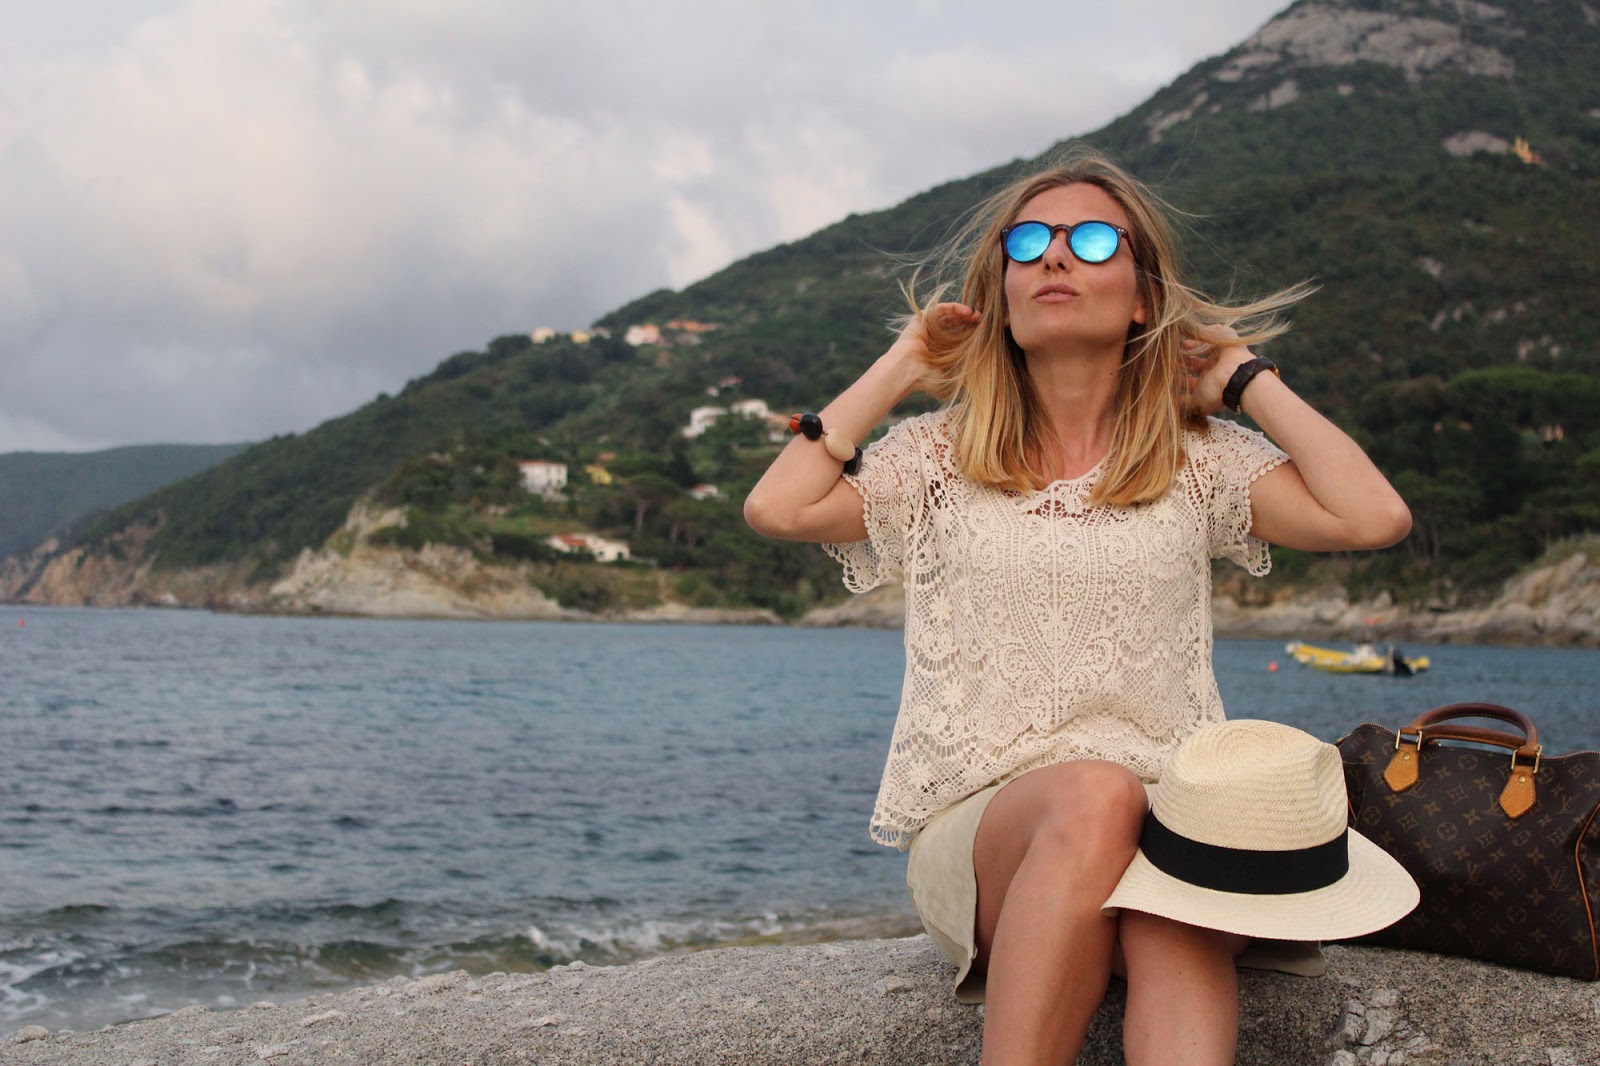 Eniwhere Fashion - Boho chic outfit - Isola d'Elba - Sant'Andrea